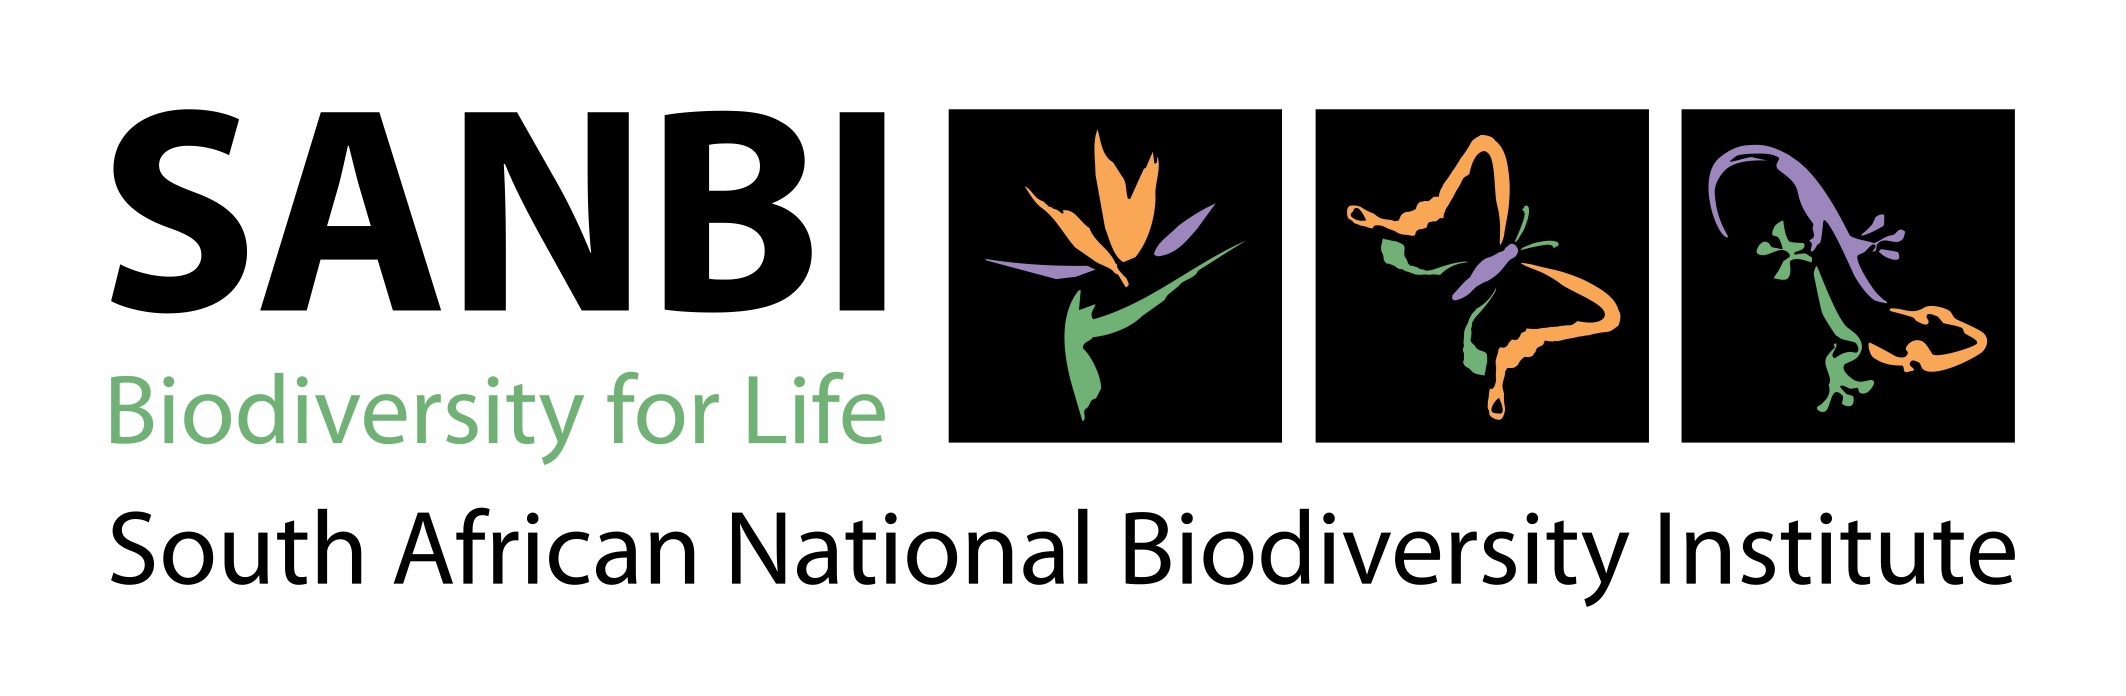 2,137 Biodiversity Logo Royalty-Free Images, Stock Photos & Pictures |  Shutterstock